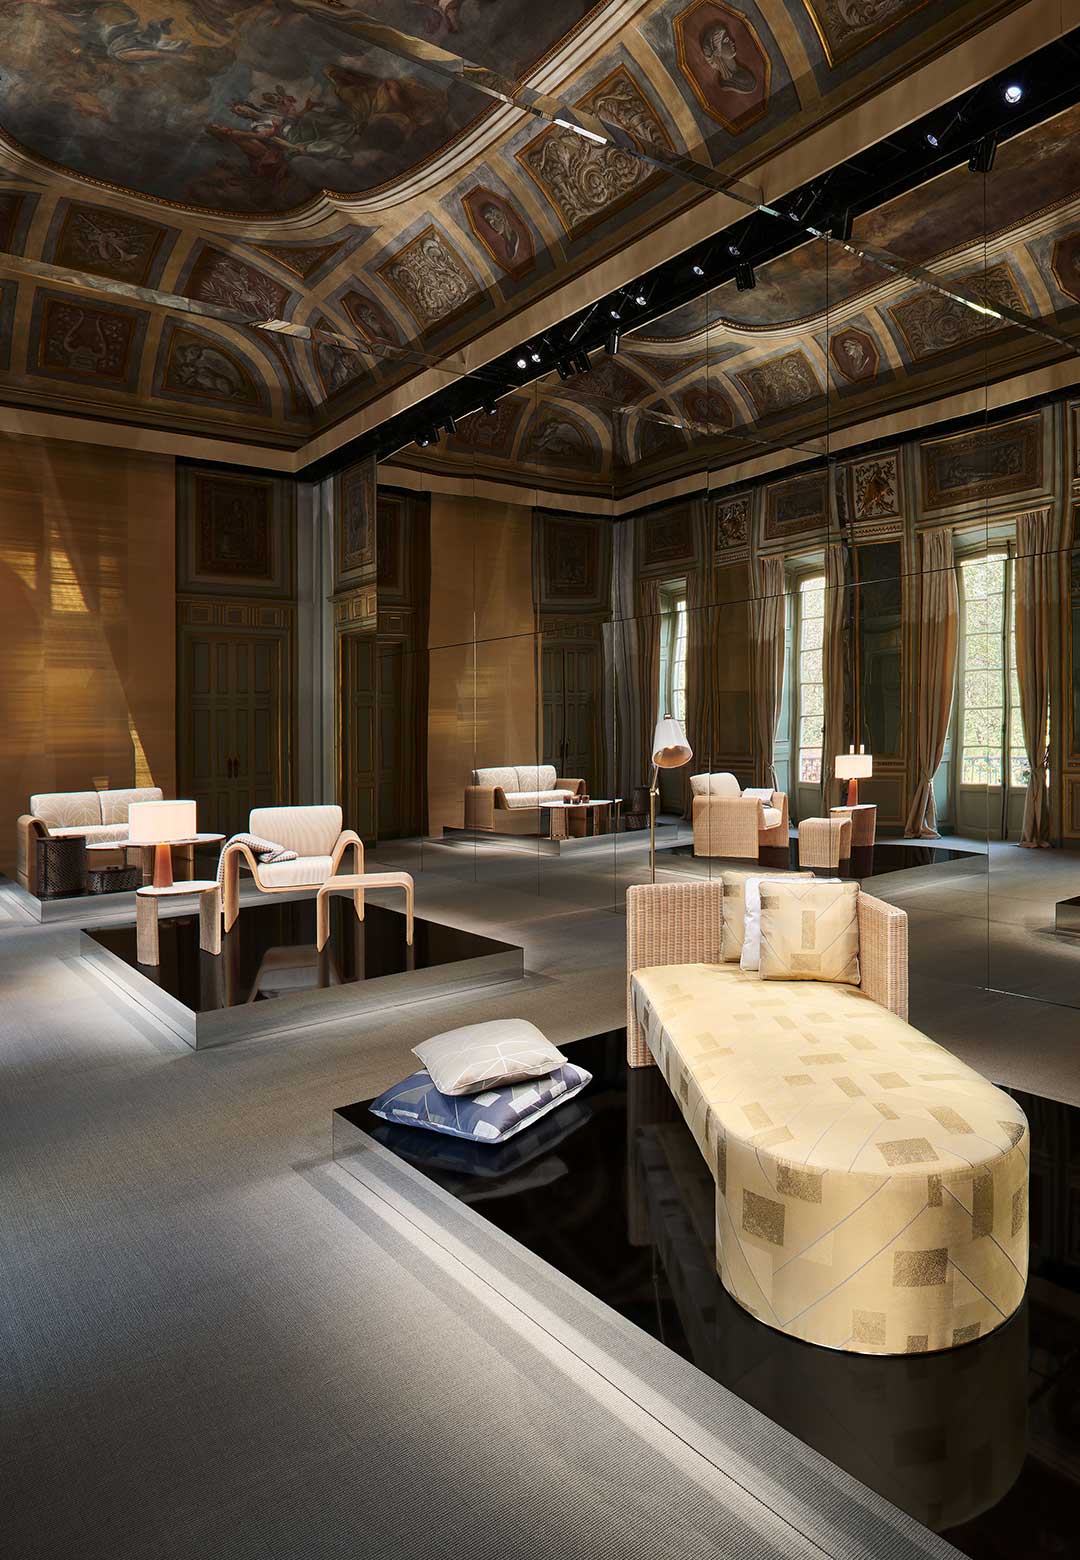 Milan Design Week 2023: what to explore at the Salone and in the city